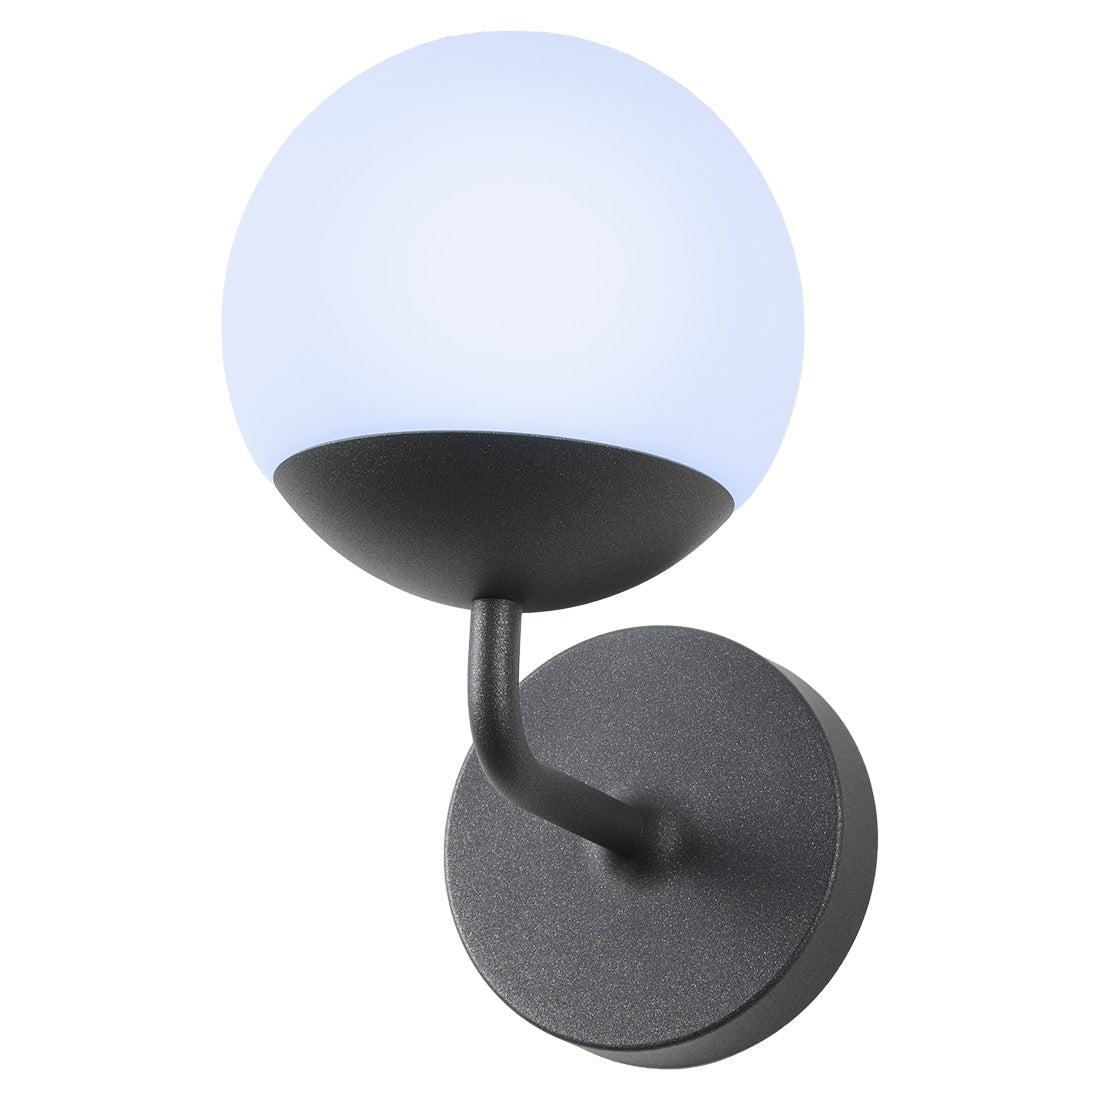 Fermob Mooon! Wall Lamp, designed by Tristan Lohner, in Anthracite.